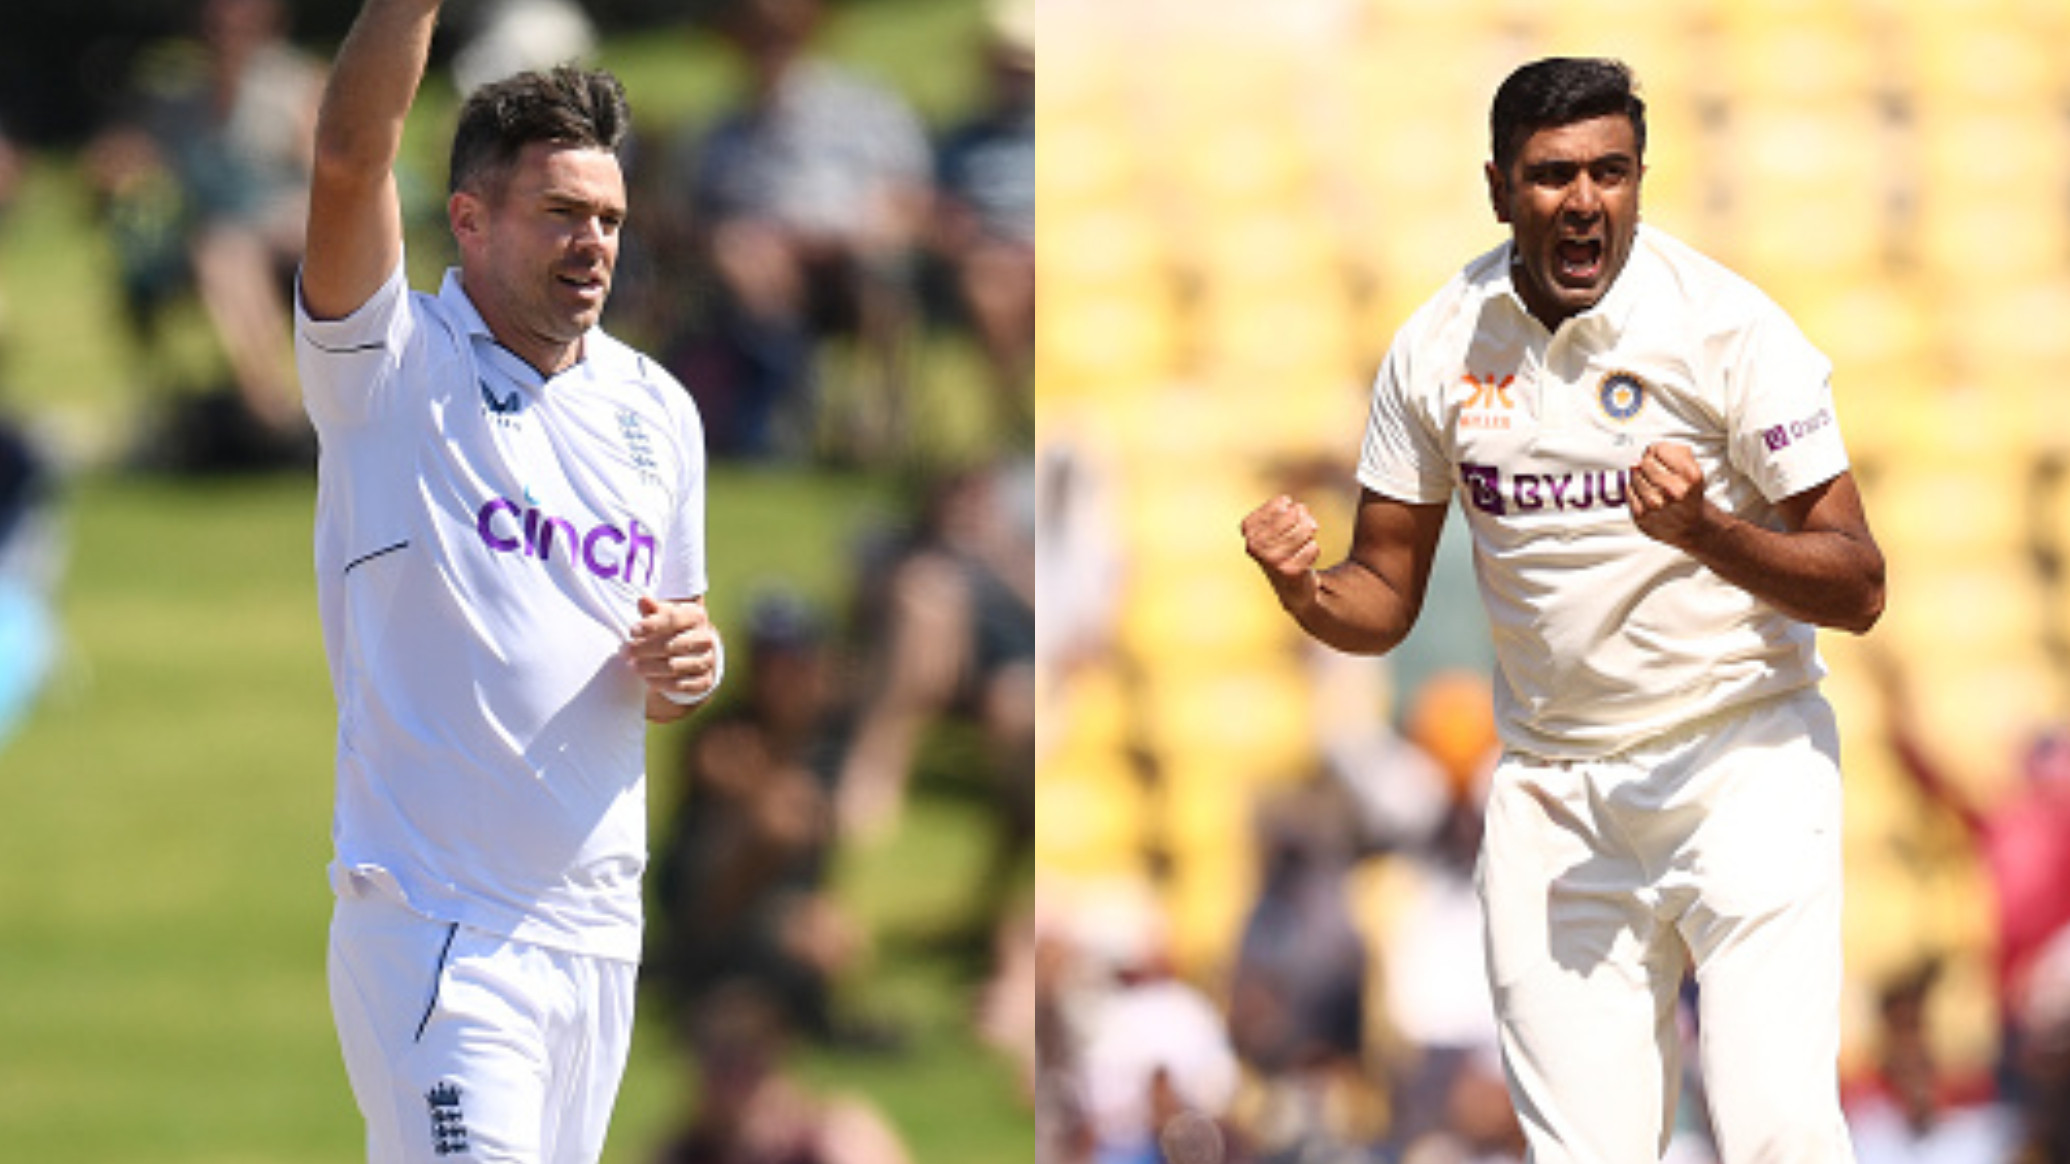 James Anderson becomes new no.1 ranked Test bowler; R Ashwin jumps to second spot